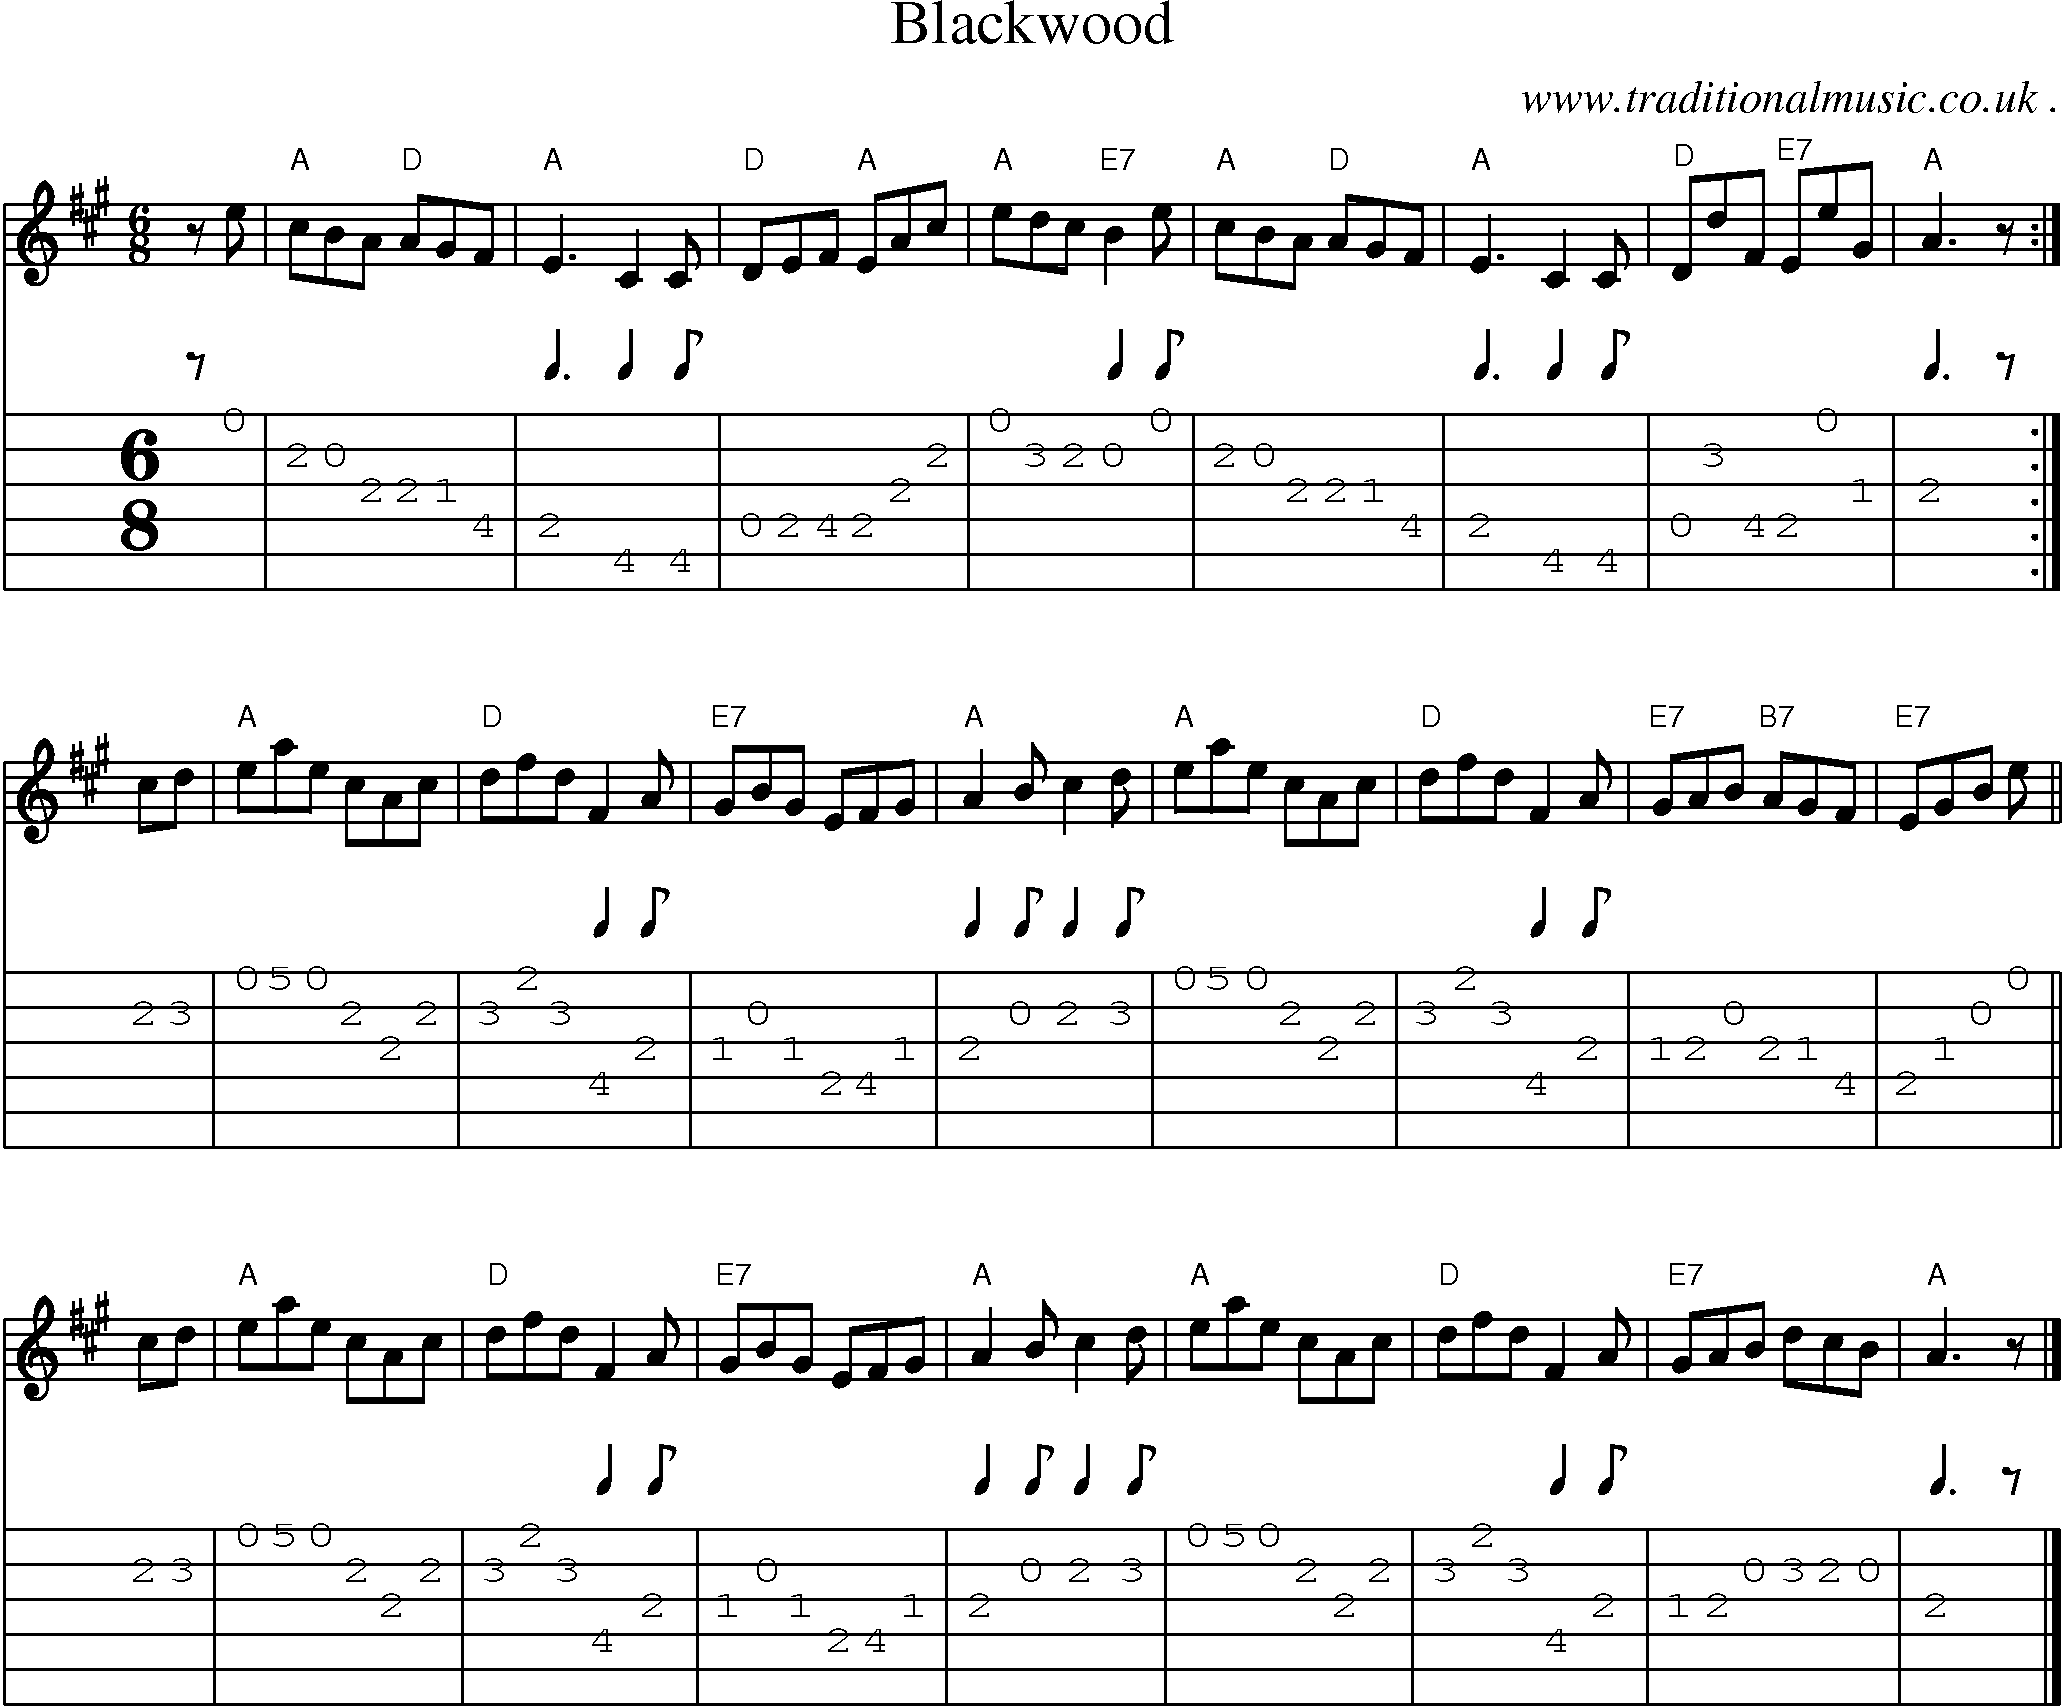 Sheet-music  score, Chords and Guitar Tabs for Blackwood